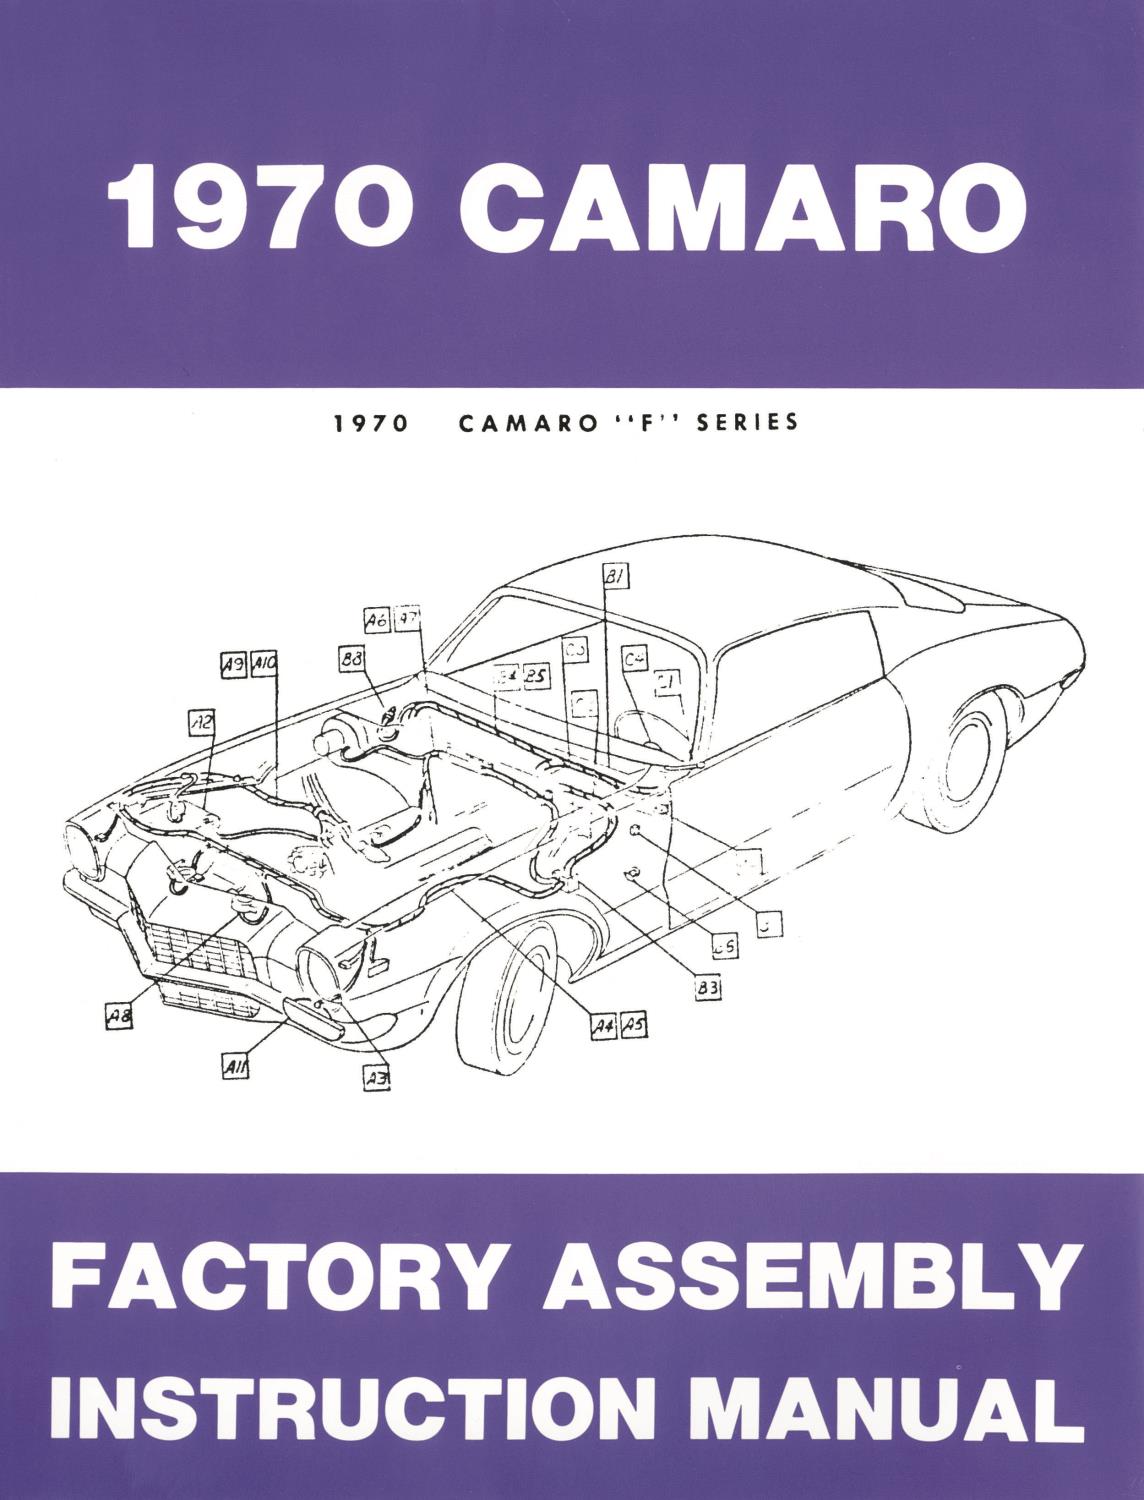 Factory Assembly Instruction Manual for 1970 Chevrolet Camaro